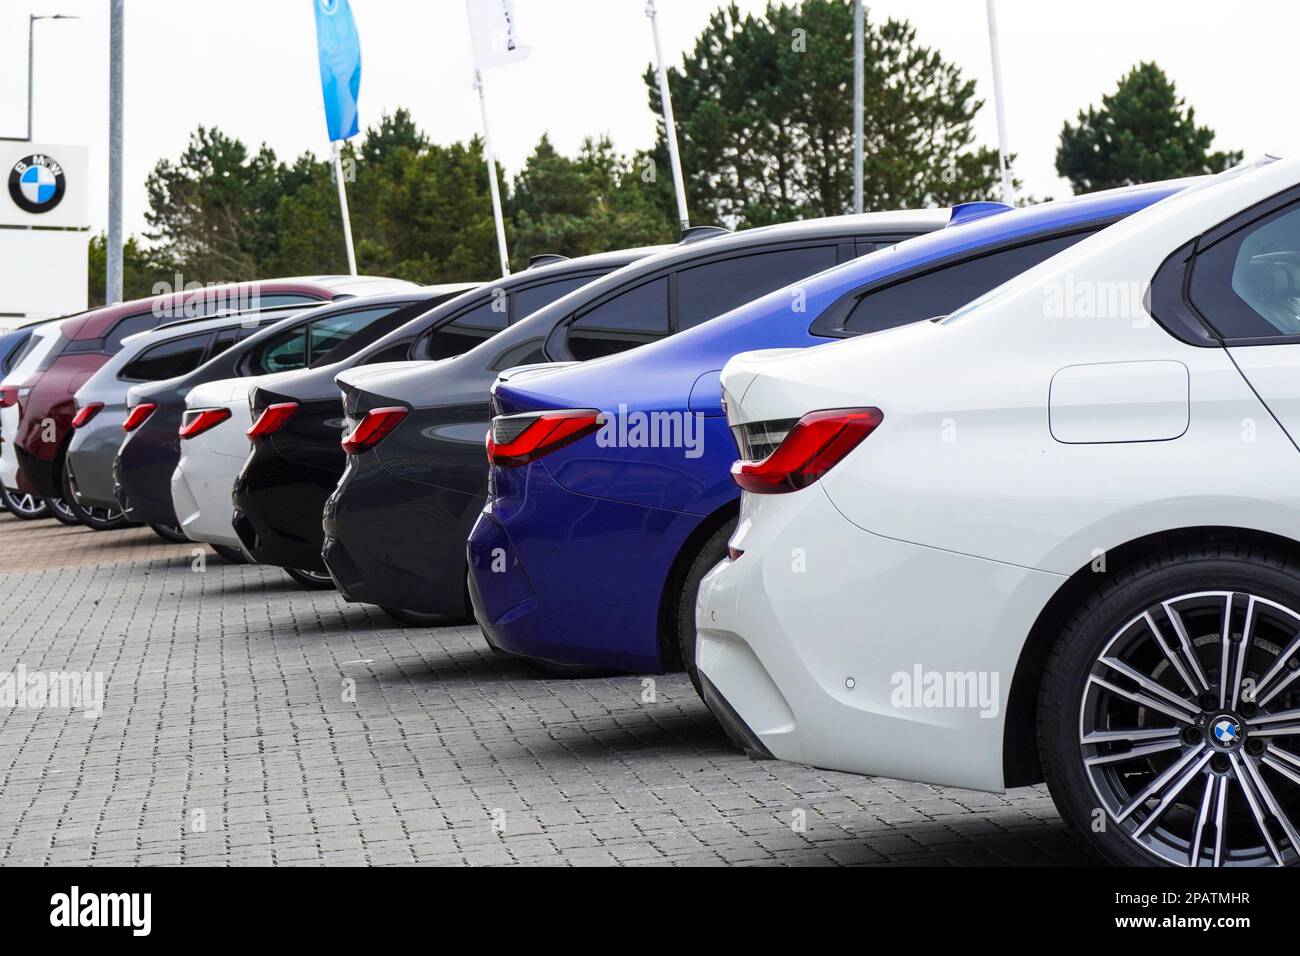 Selection of secondhand BMW crs for sale in a garage forecourt, UK Stock Photo